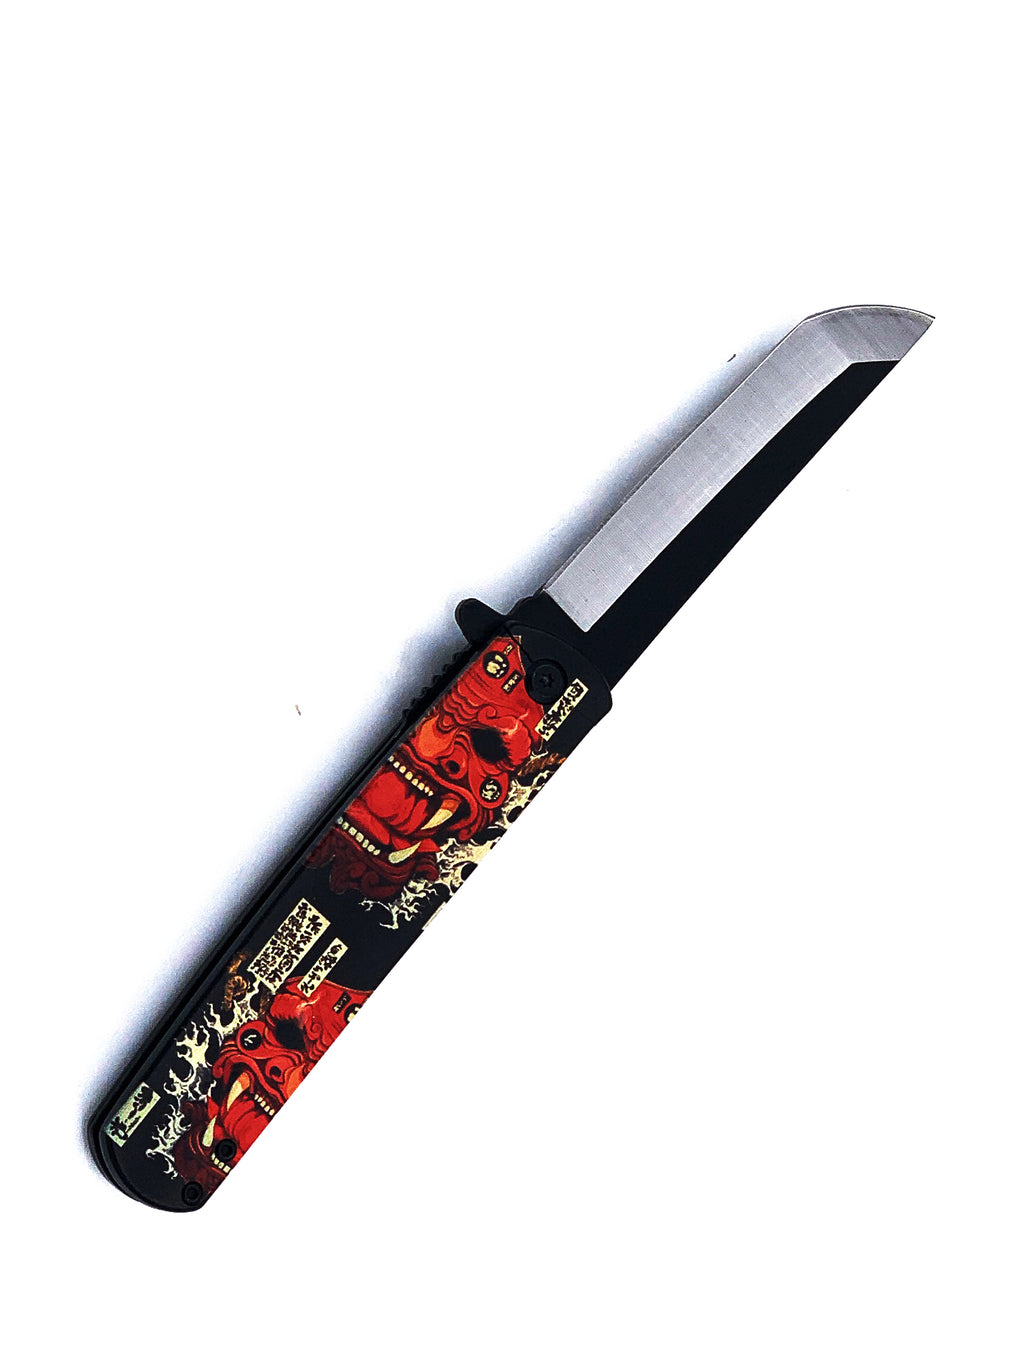 Fire Mask Samurai Spring Assisted Pocket Knife with Two Tone Rounded Tanto Blade